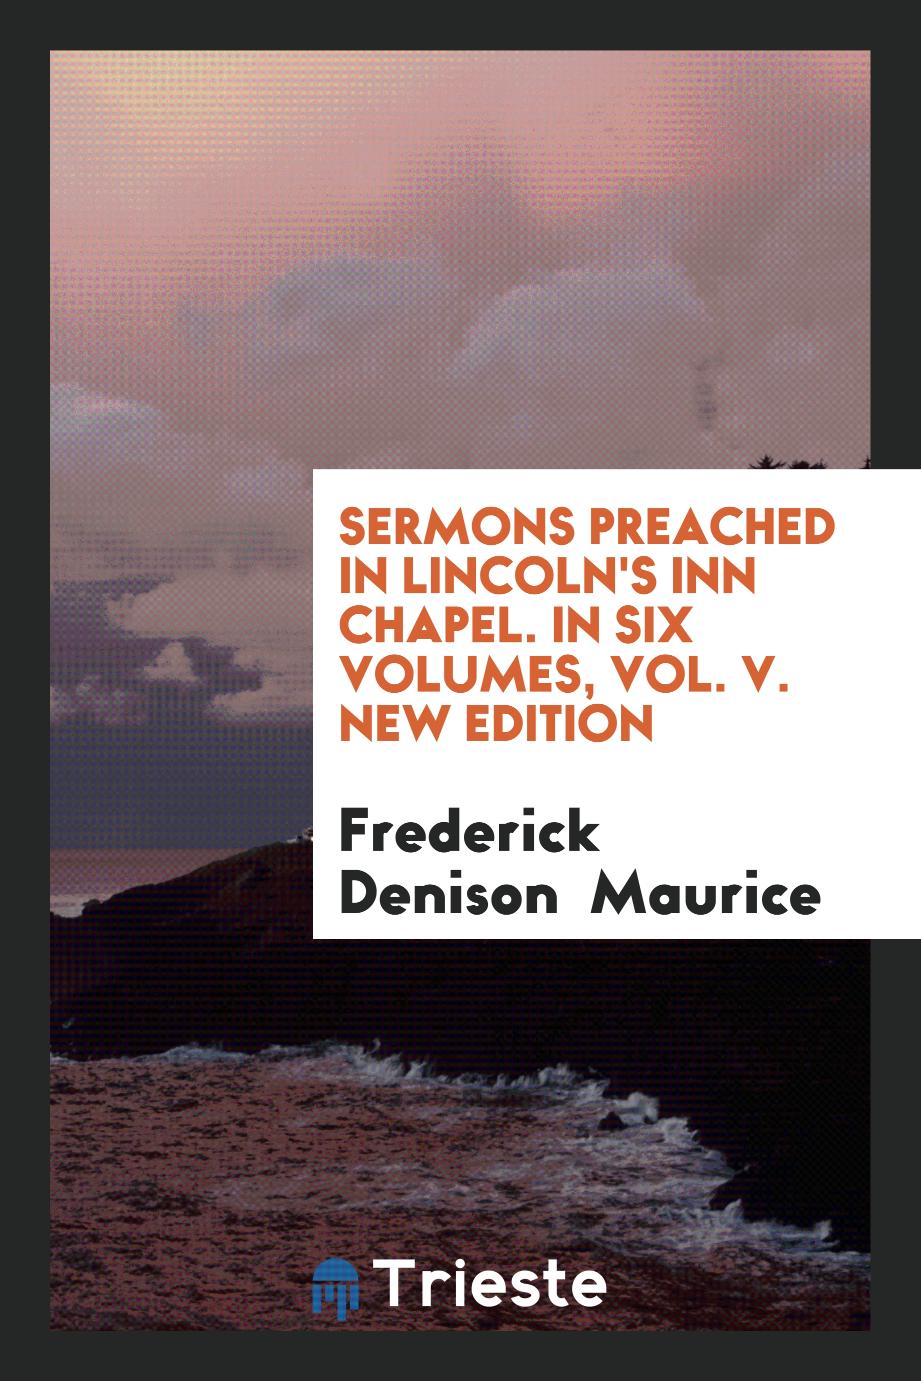 Sermons Preached in Lincoln's Inn Chapel. In Six Volumes, Vol. V. New Edition